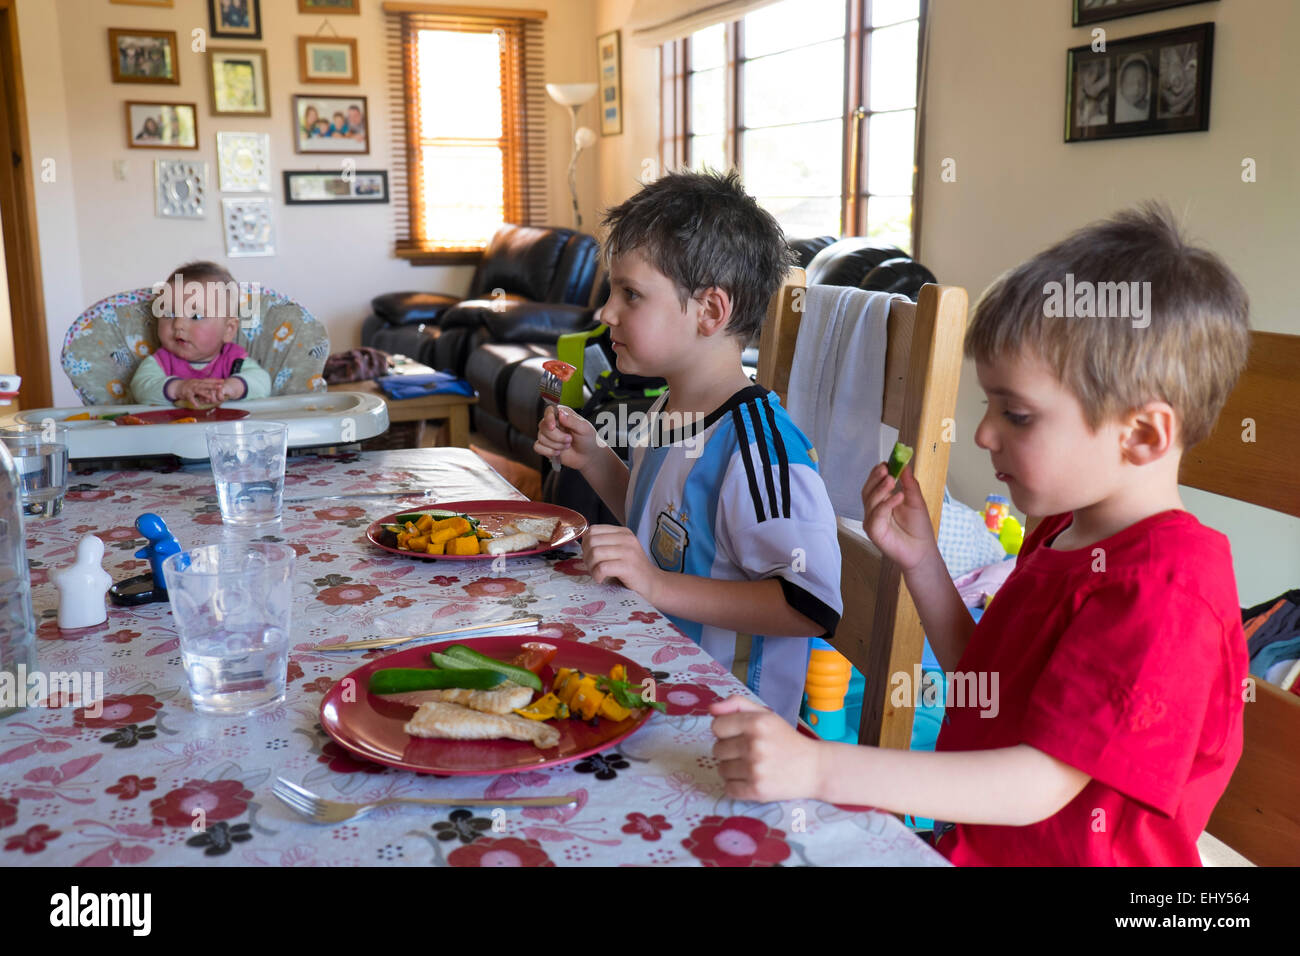 Children eating a healthy meal at home Stock Photo